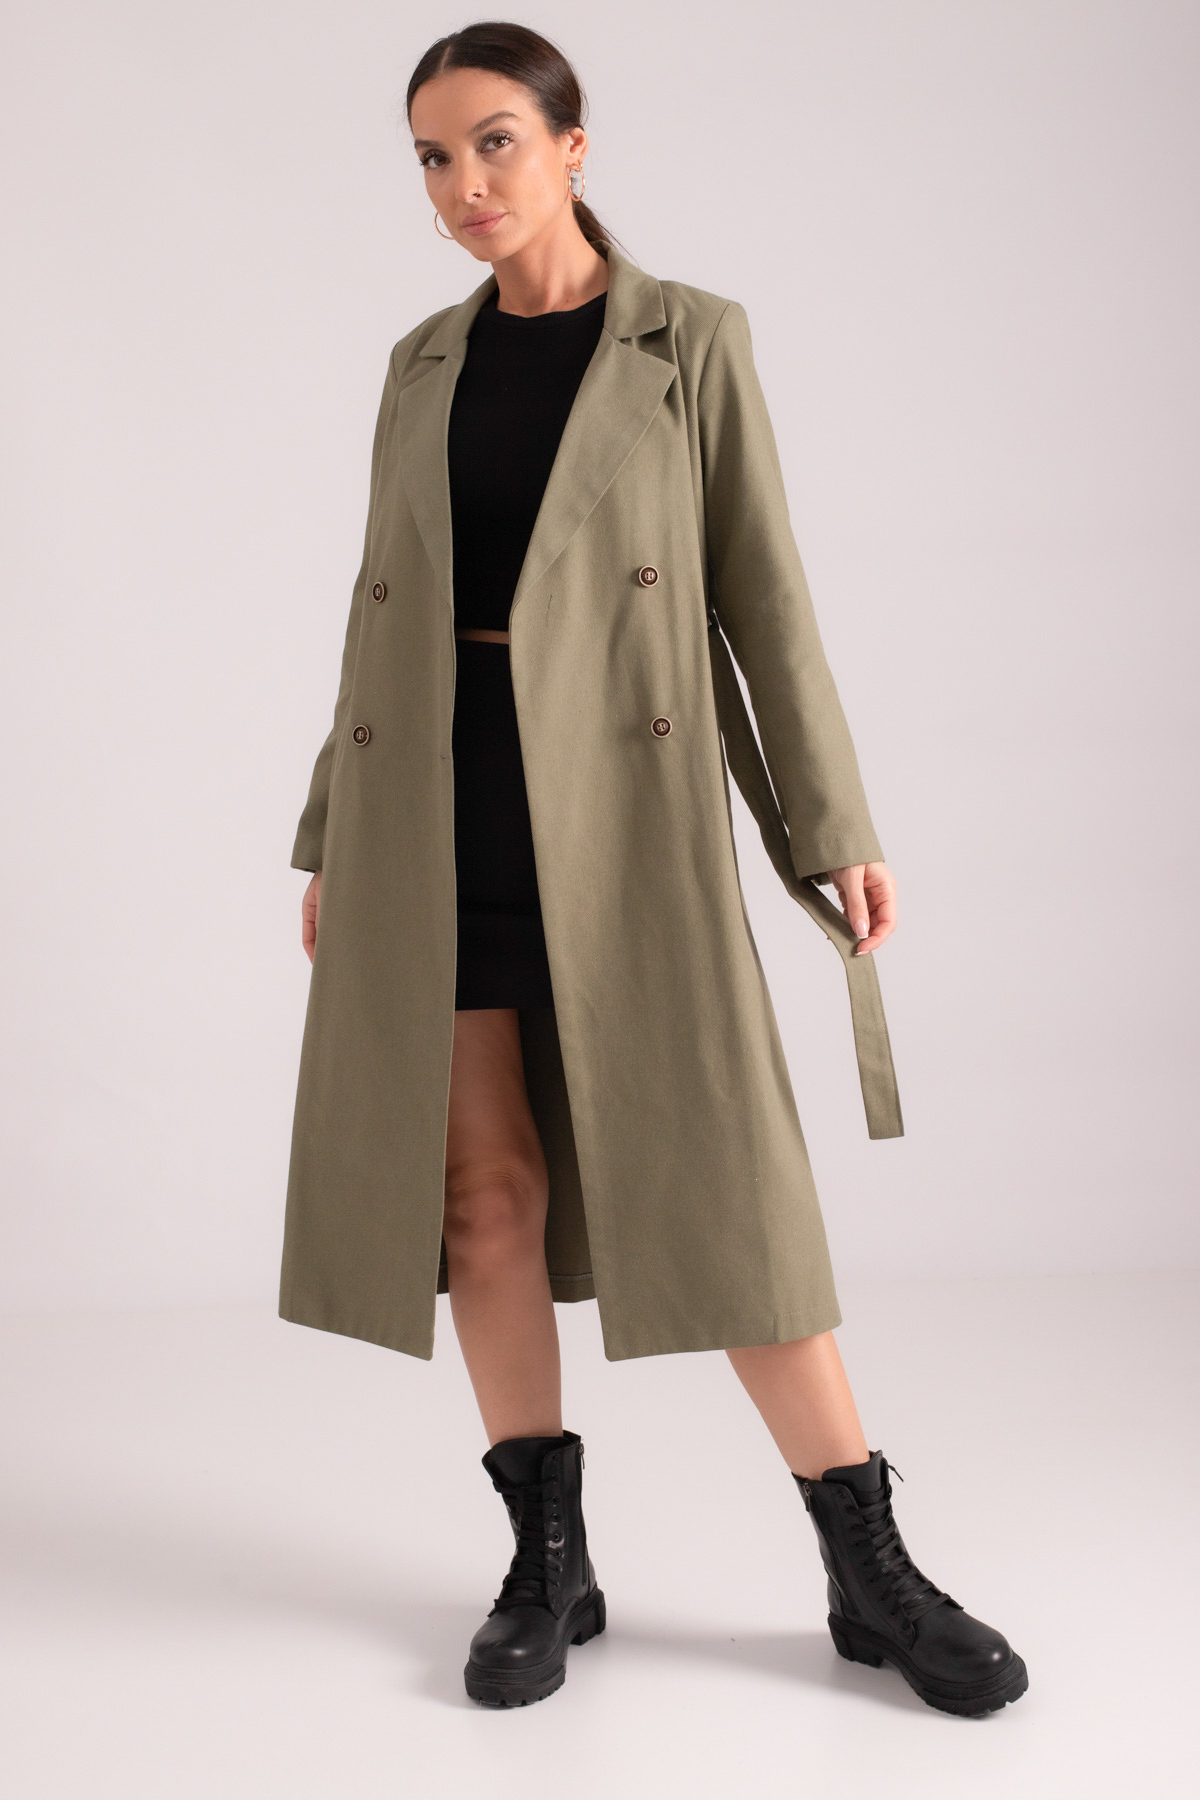 Levně armonika Women's Khaki Double Breasted Collar Waist Belted Long Trench Coat with Pocket